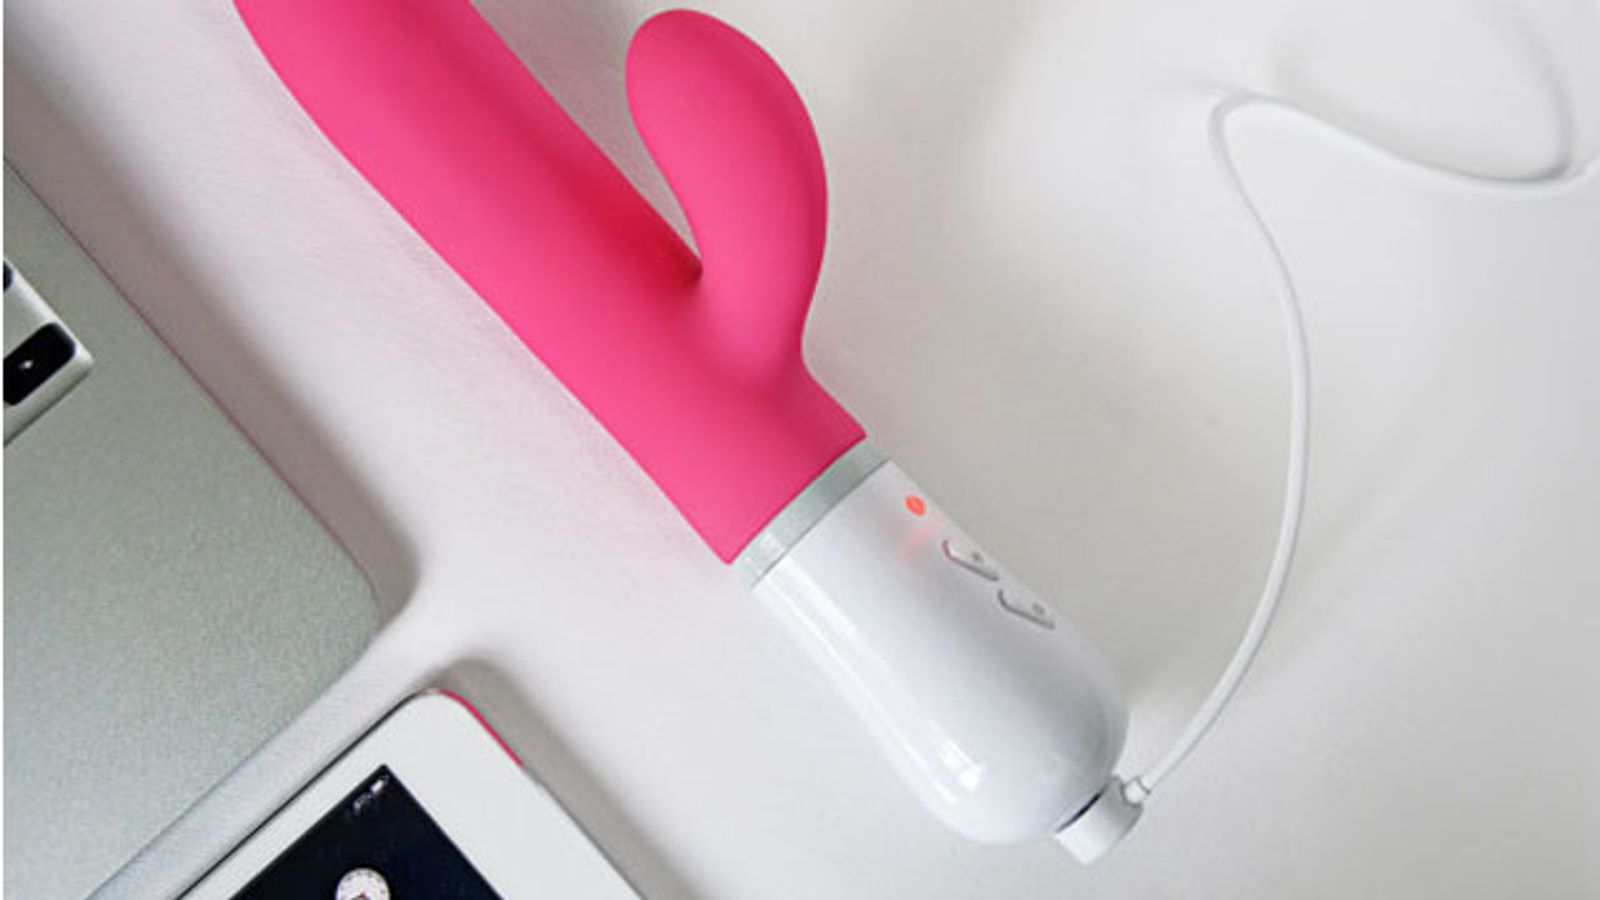 Lovense Making Headlines With Sex Toys For VR Porn